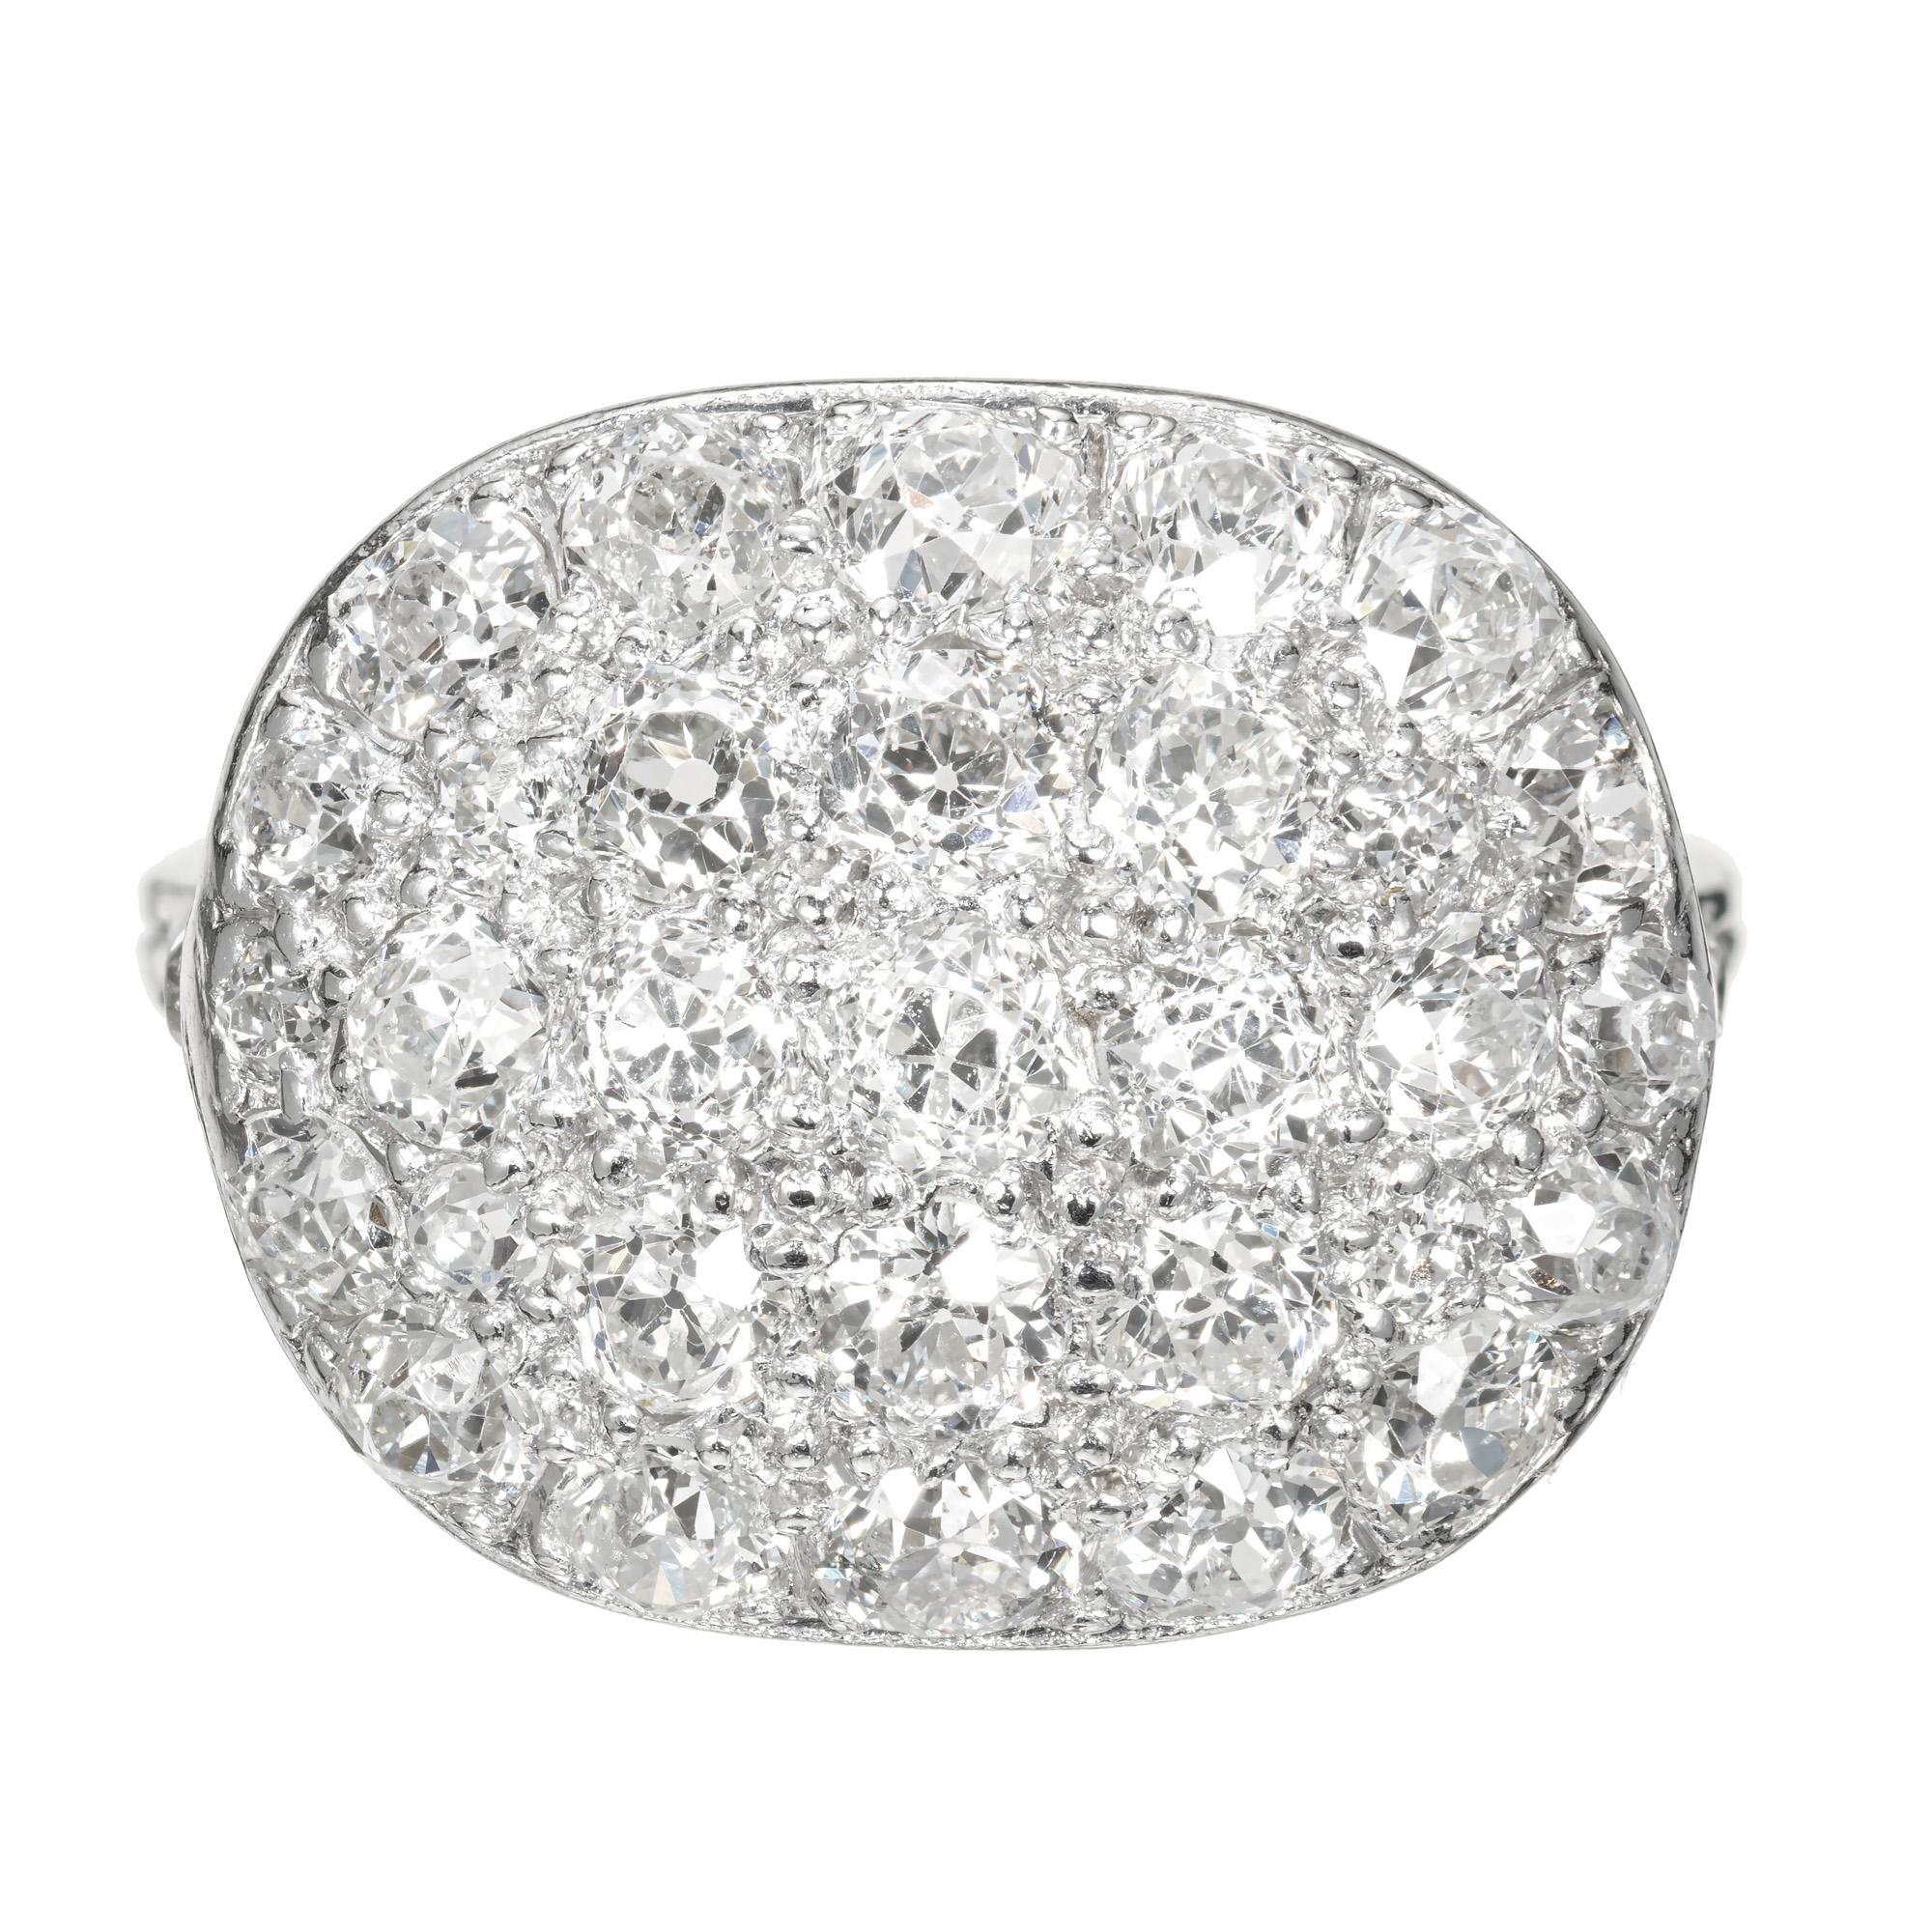 Diamond cluster ring. Domed handmade platinum setting with 35 round pave set old European cut diamonds, circa 1910.   

35 round old European diamonds, H-I SI approx. 1.54cts
Size 6.5 and sizable 
Platinum 
Stamped: Platinum 
4.5 grams
Width at top: